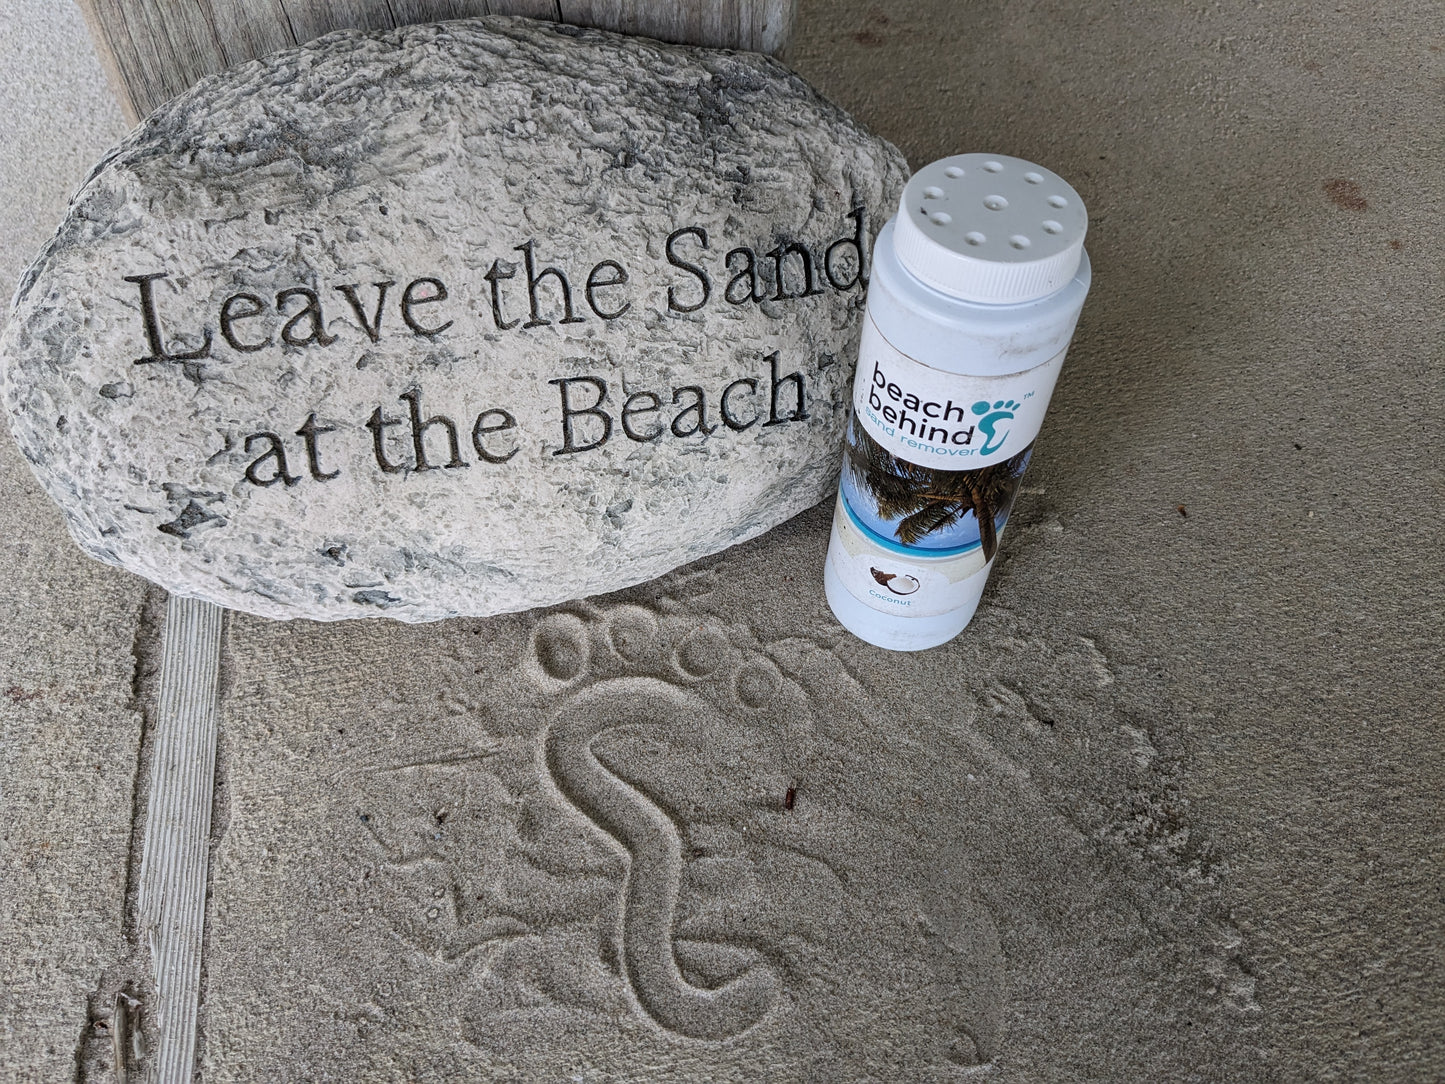 Welcome to our beach house sign that says leave the sand at the beach with a bottle of beach sand remover